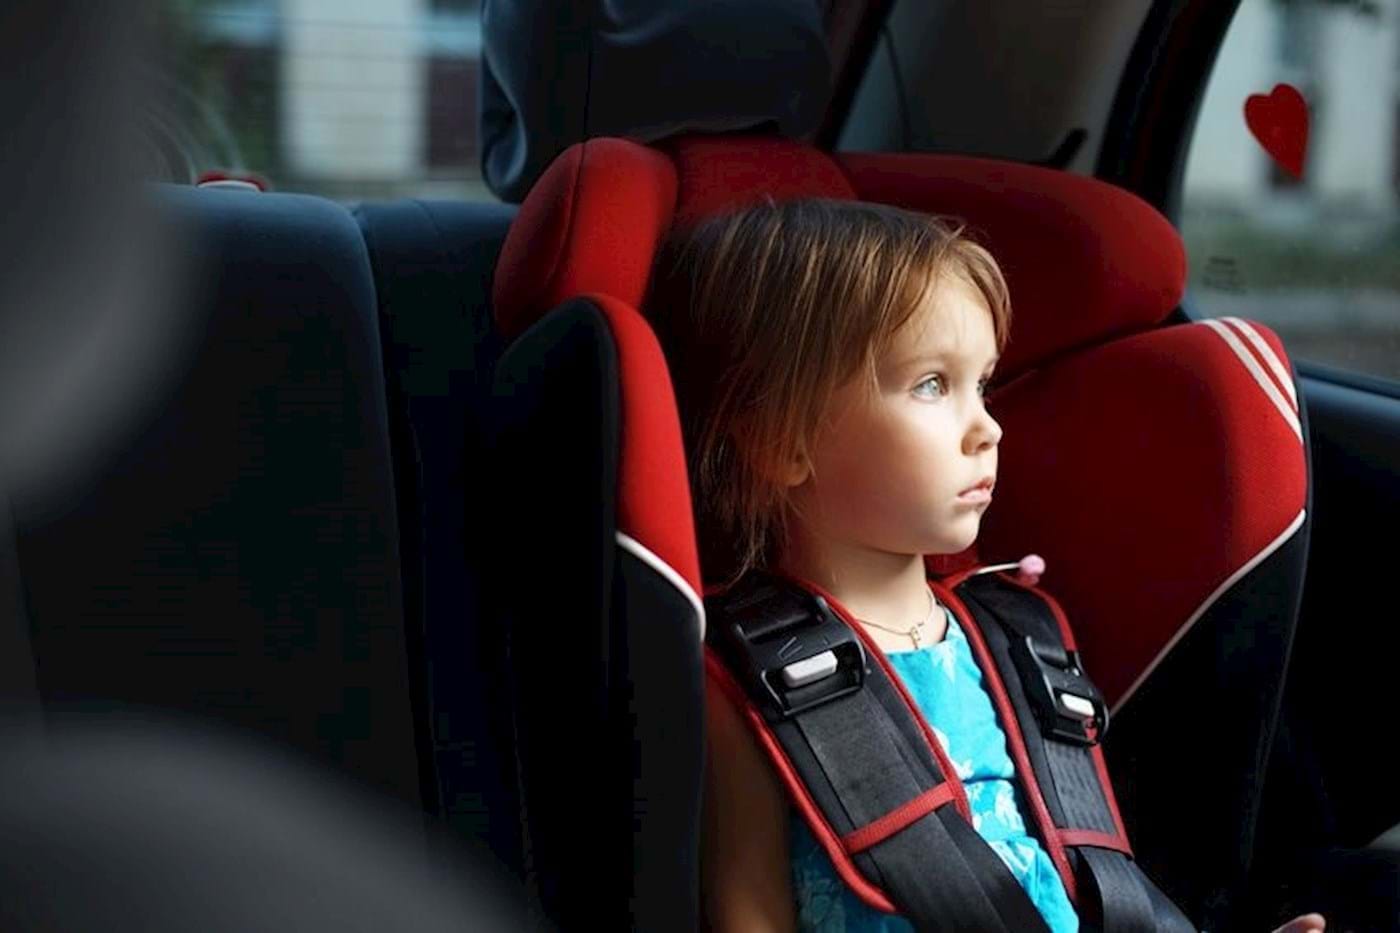 Babyonboard, What Is The Law For Child Car Seats In Spain